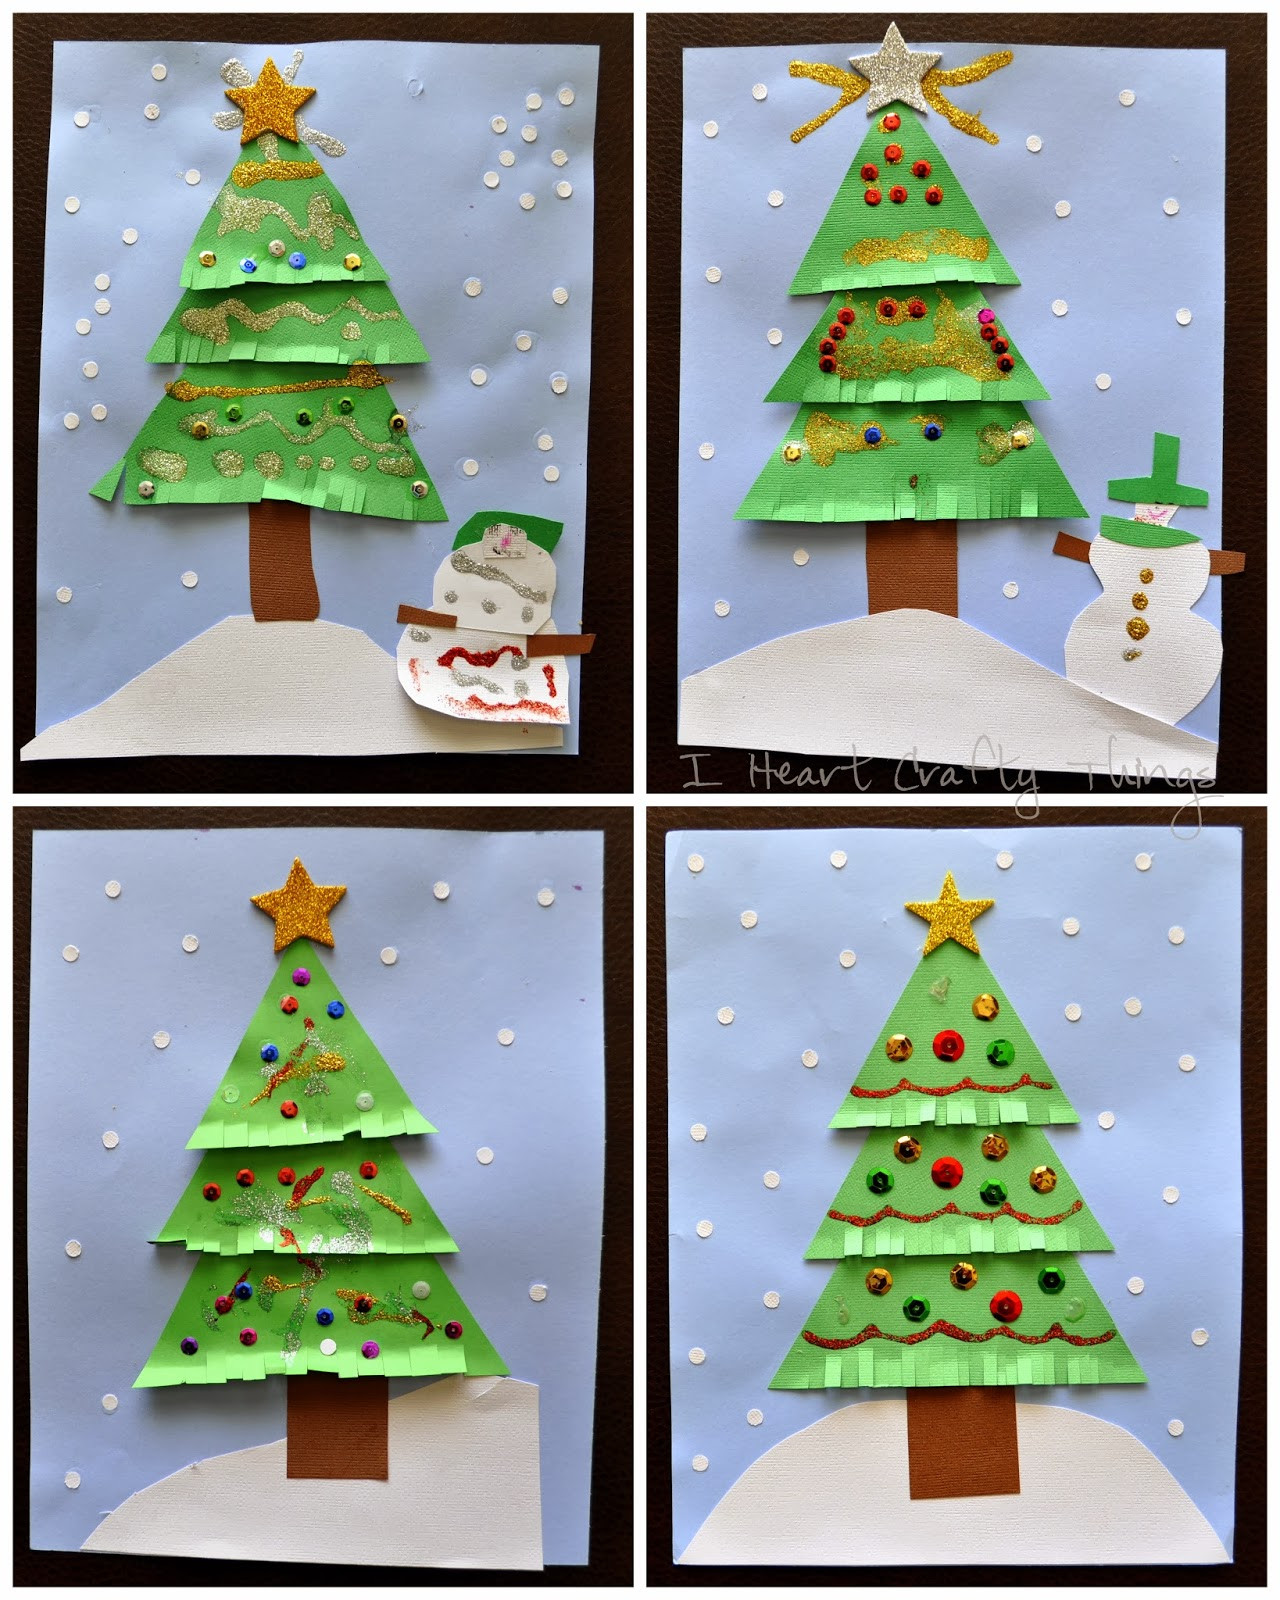 Christmas Tree Art And Craft
 Top 10 Posts in 2013